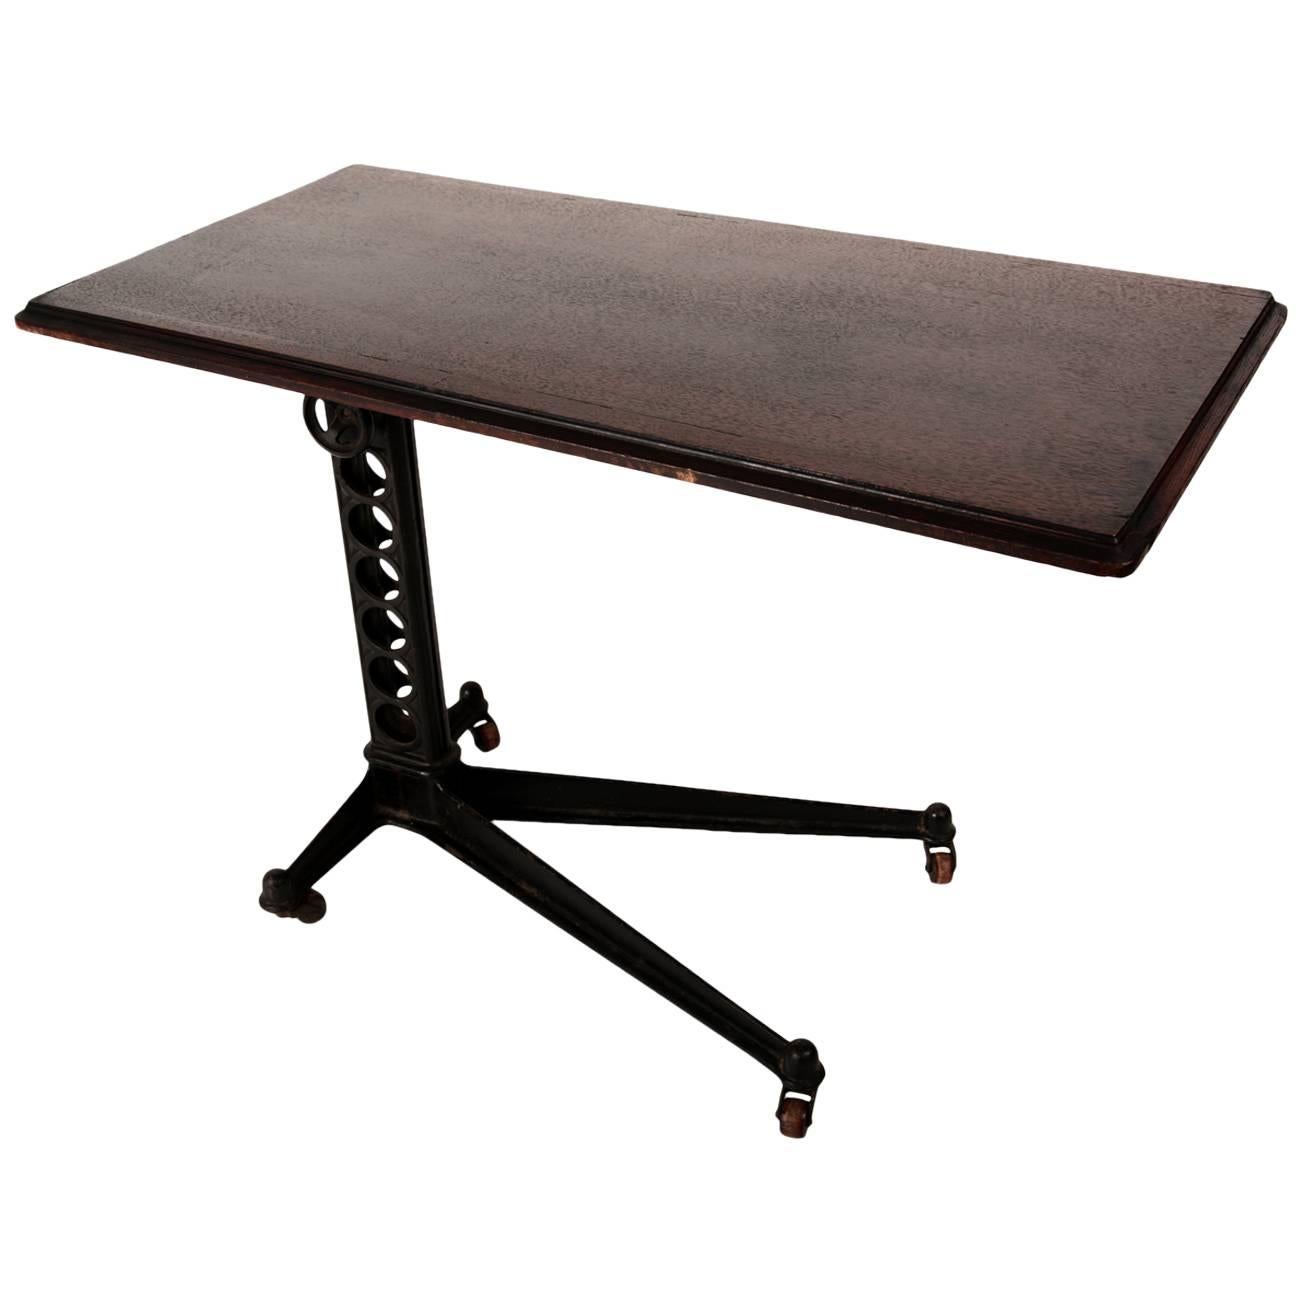 Adjustable Height Wood Top Table For Sale